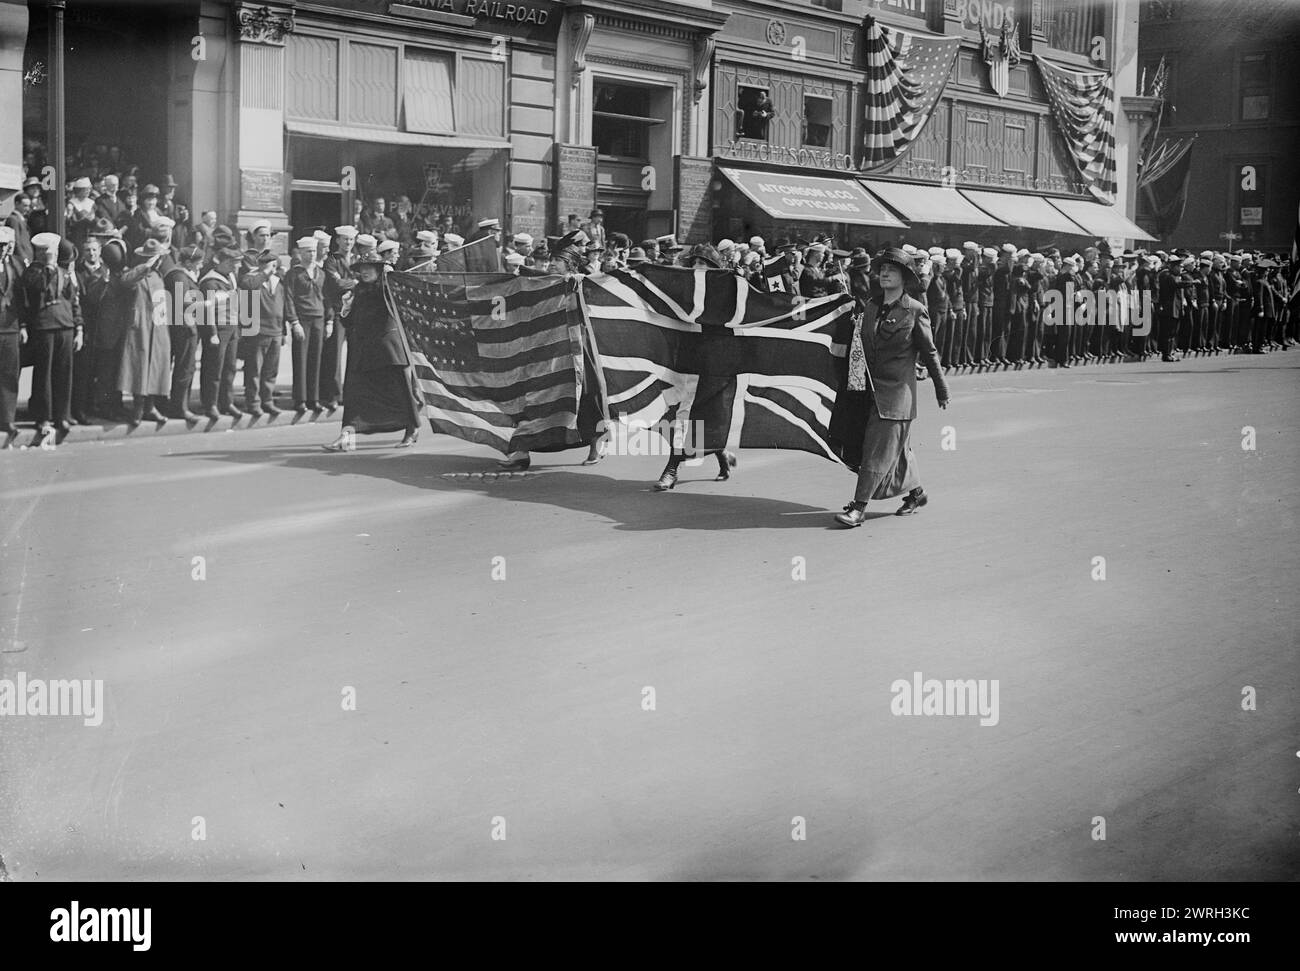 Liberty Parade, 1917 or 1918. Women with American and British flags marching in a parade to support Liberty bonds during World War I, New York City. Stock Photo